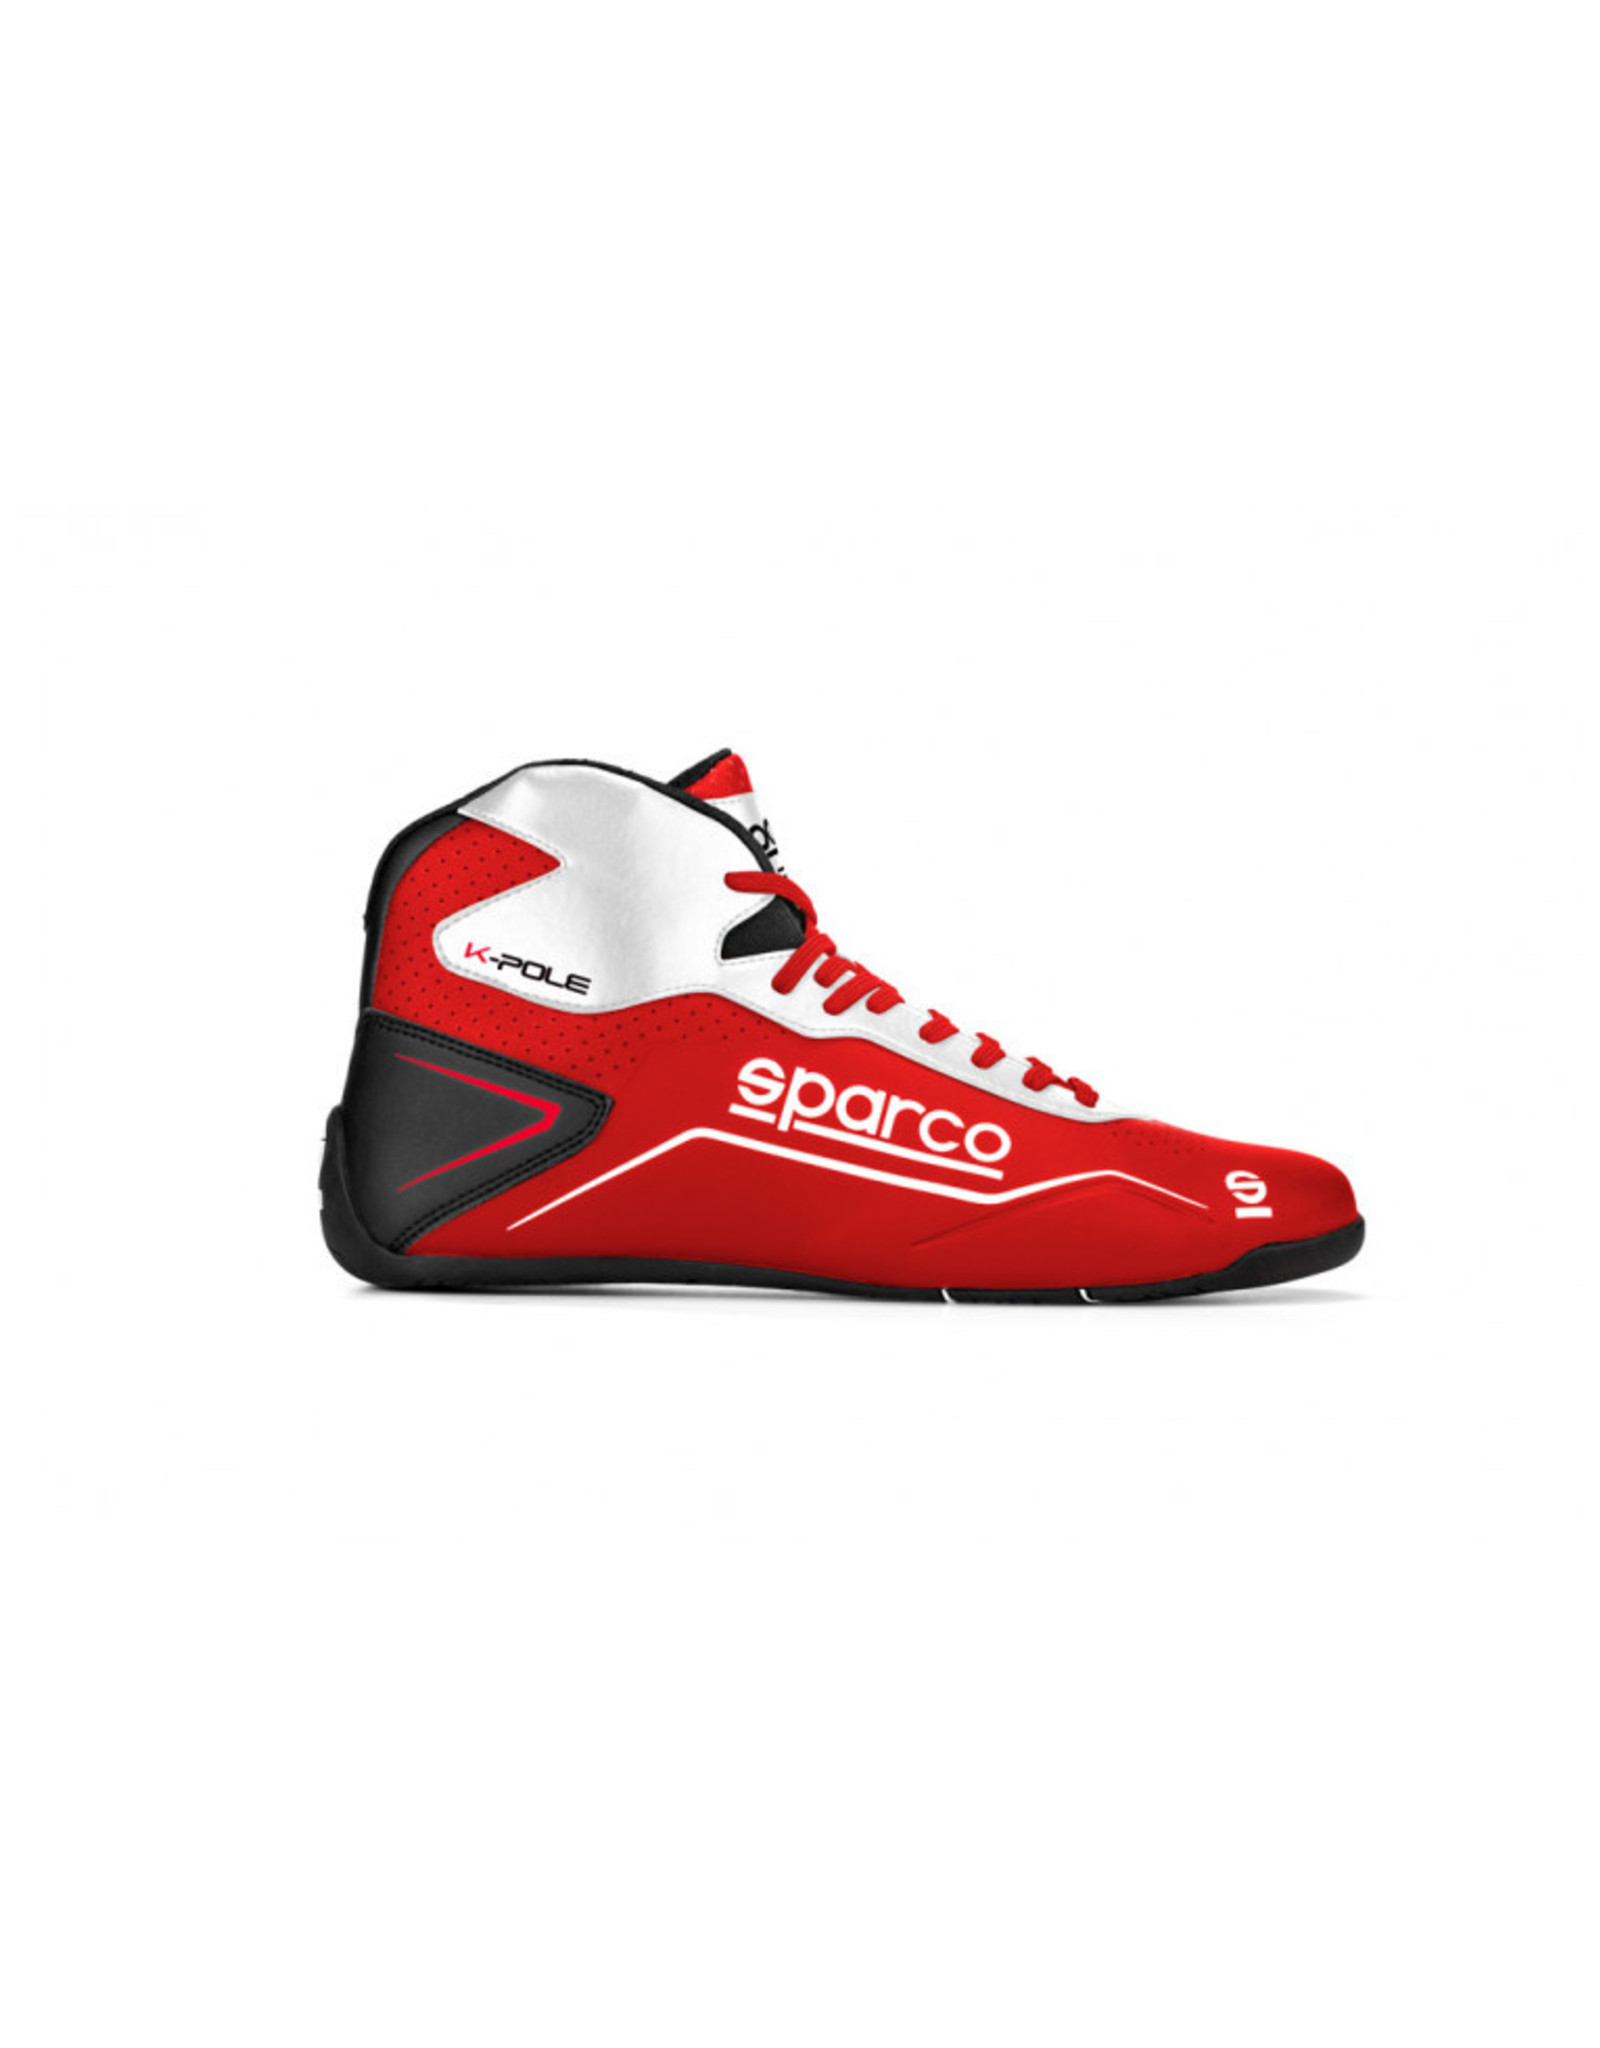 Sparco Sparco K-pole red/ white